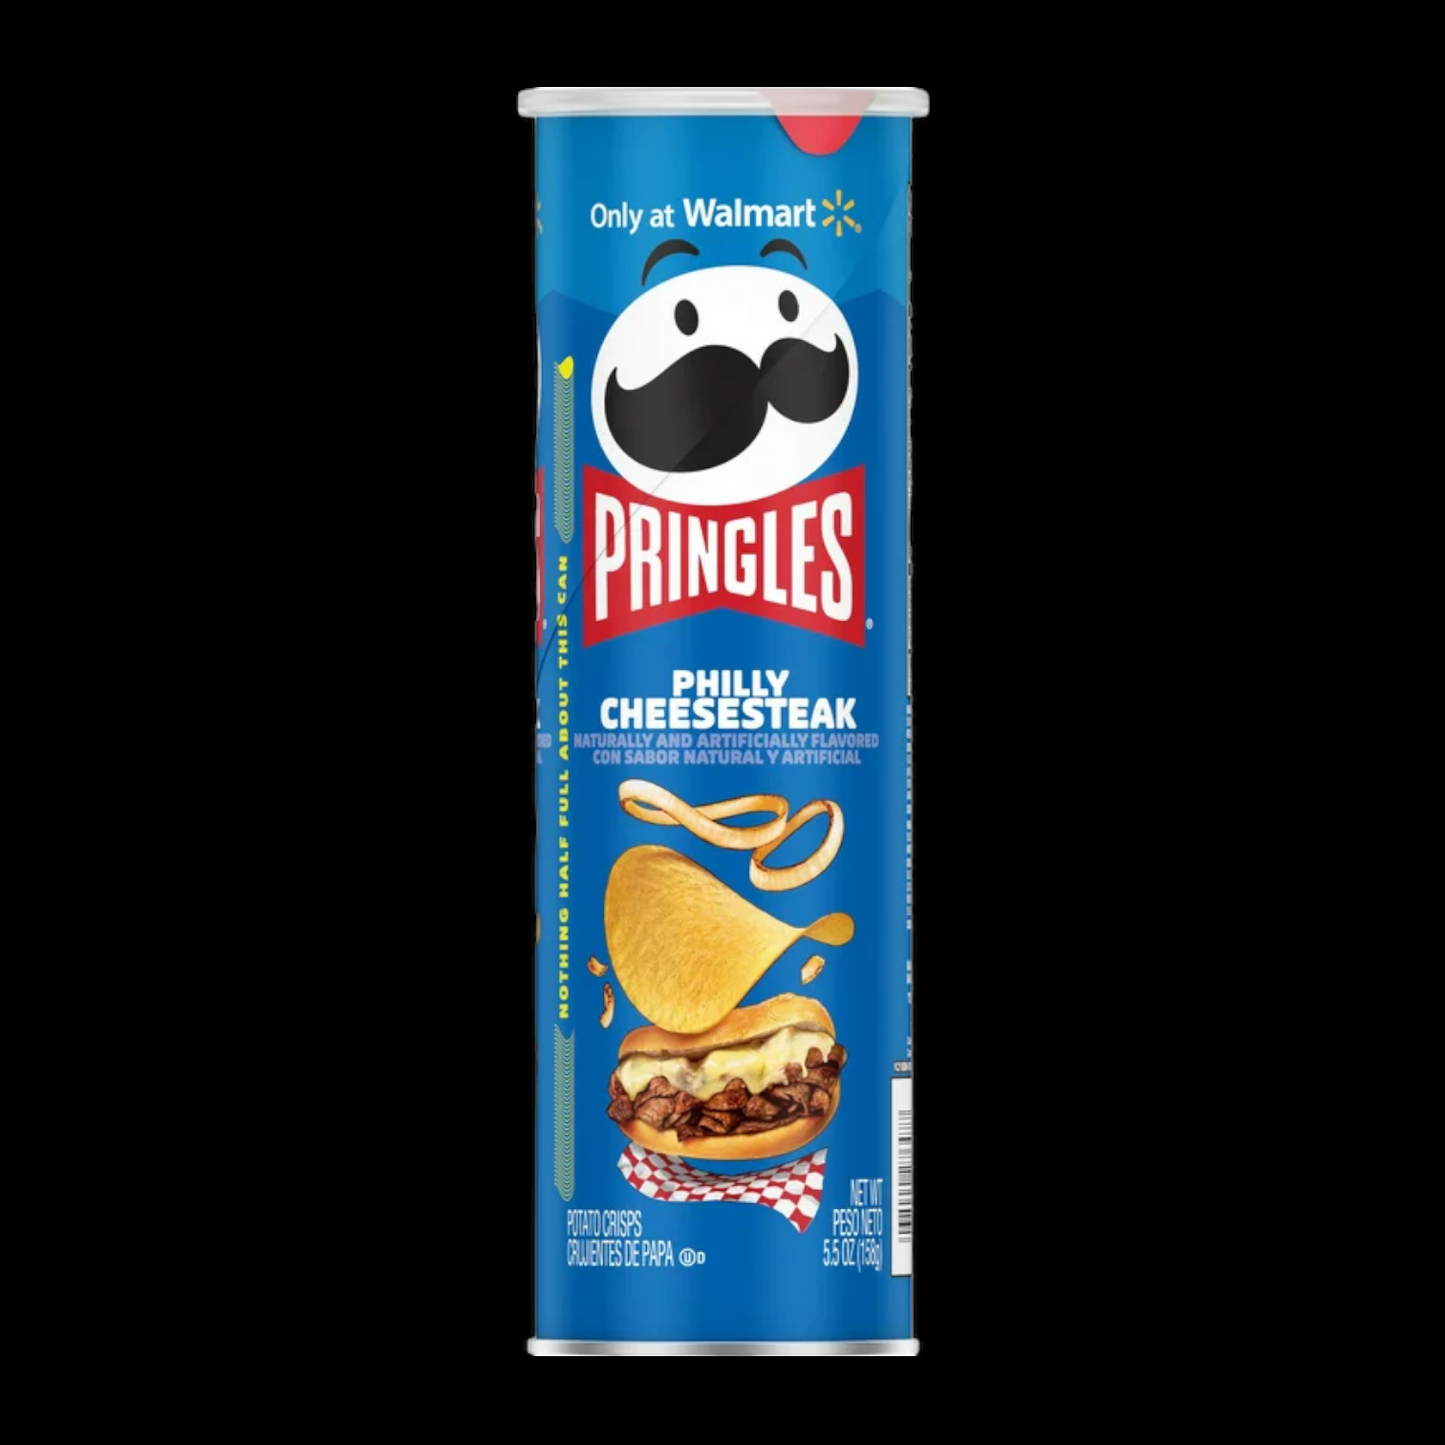 Pringles Philly Cheesesteak 158g - Limited Edition